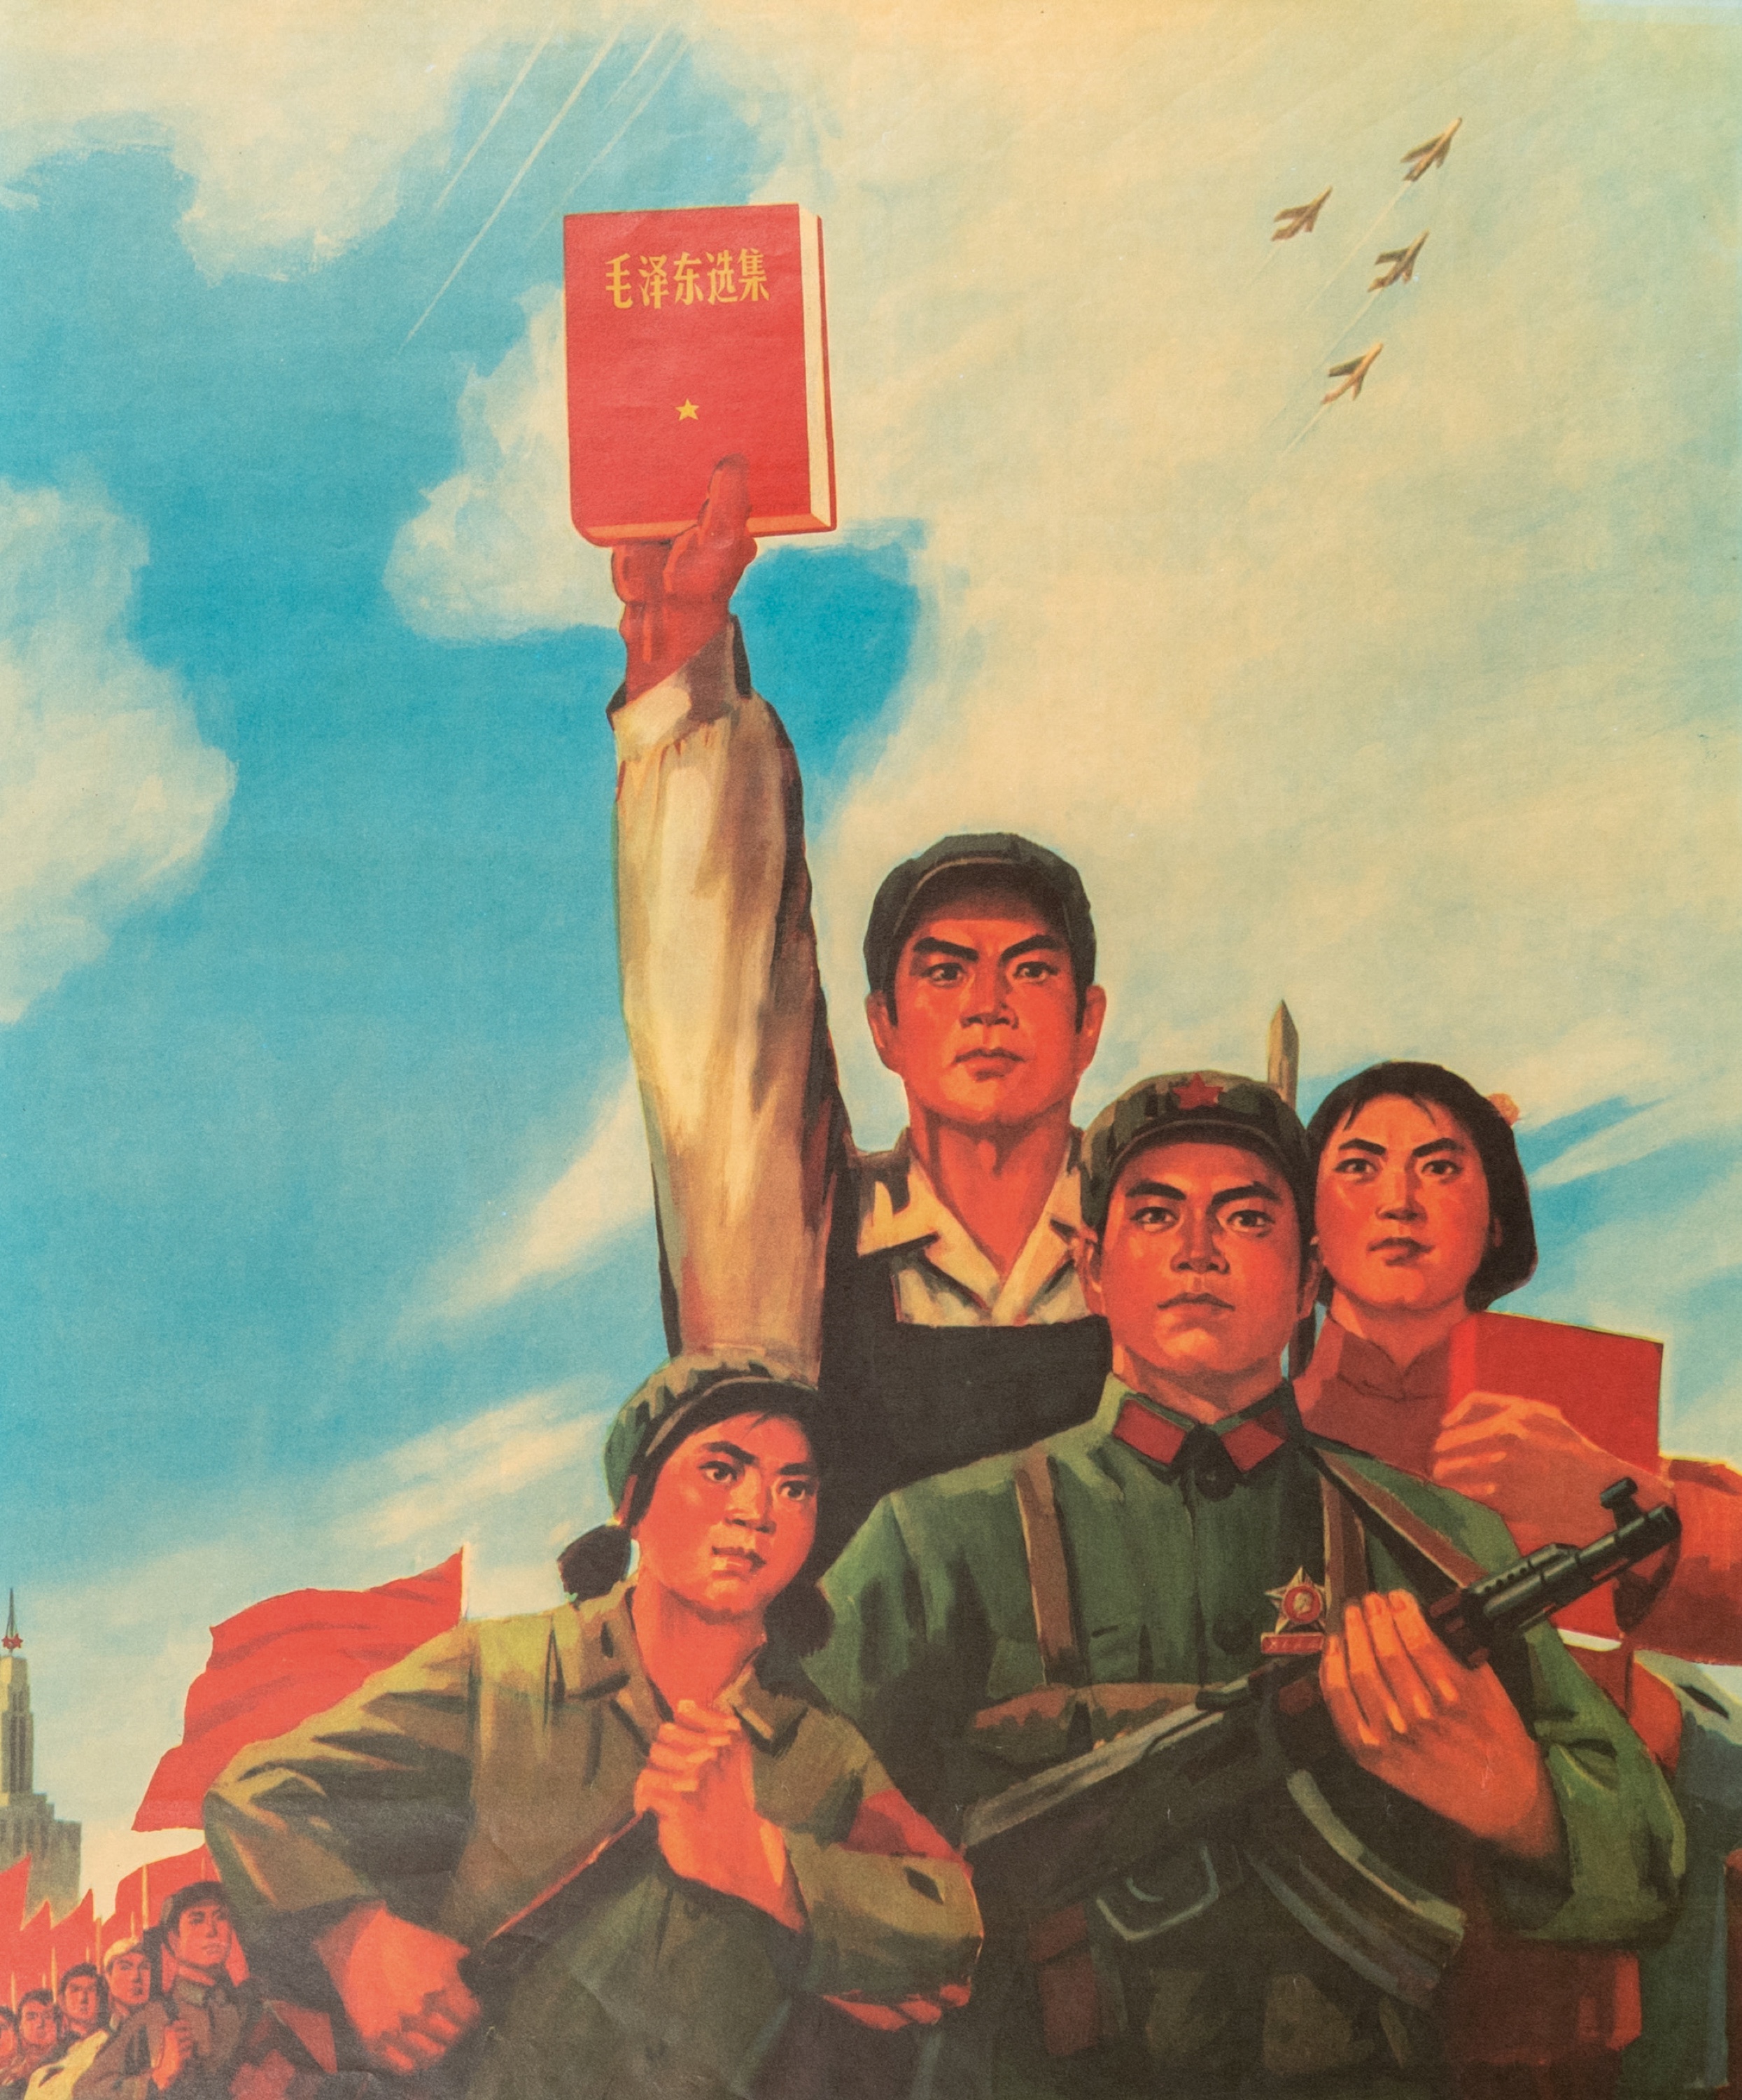 29 Chinese Cultural Revolution propaganda posters - Image 31 of 43